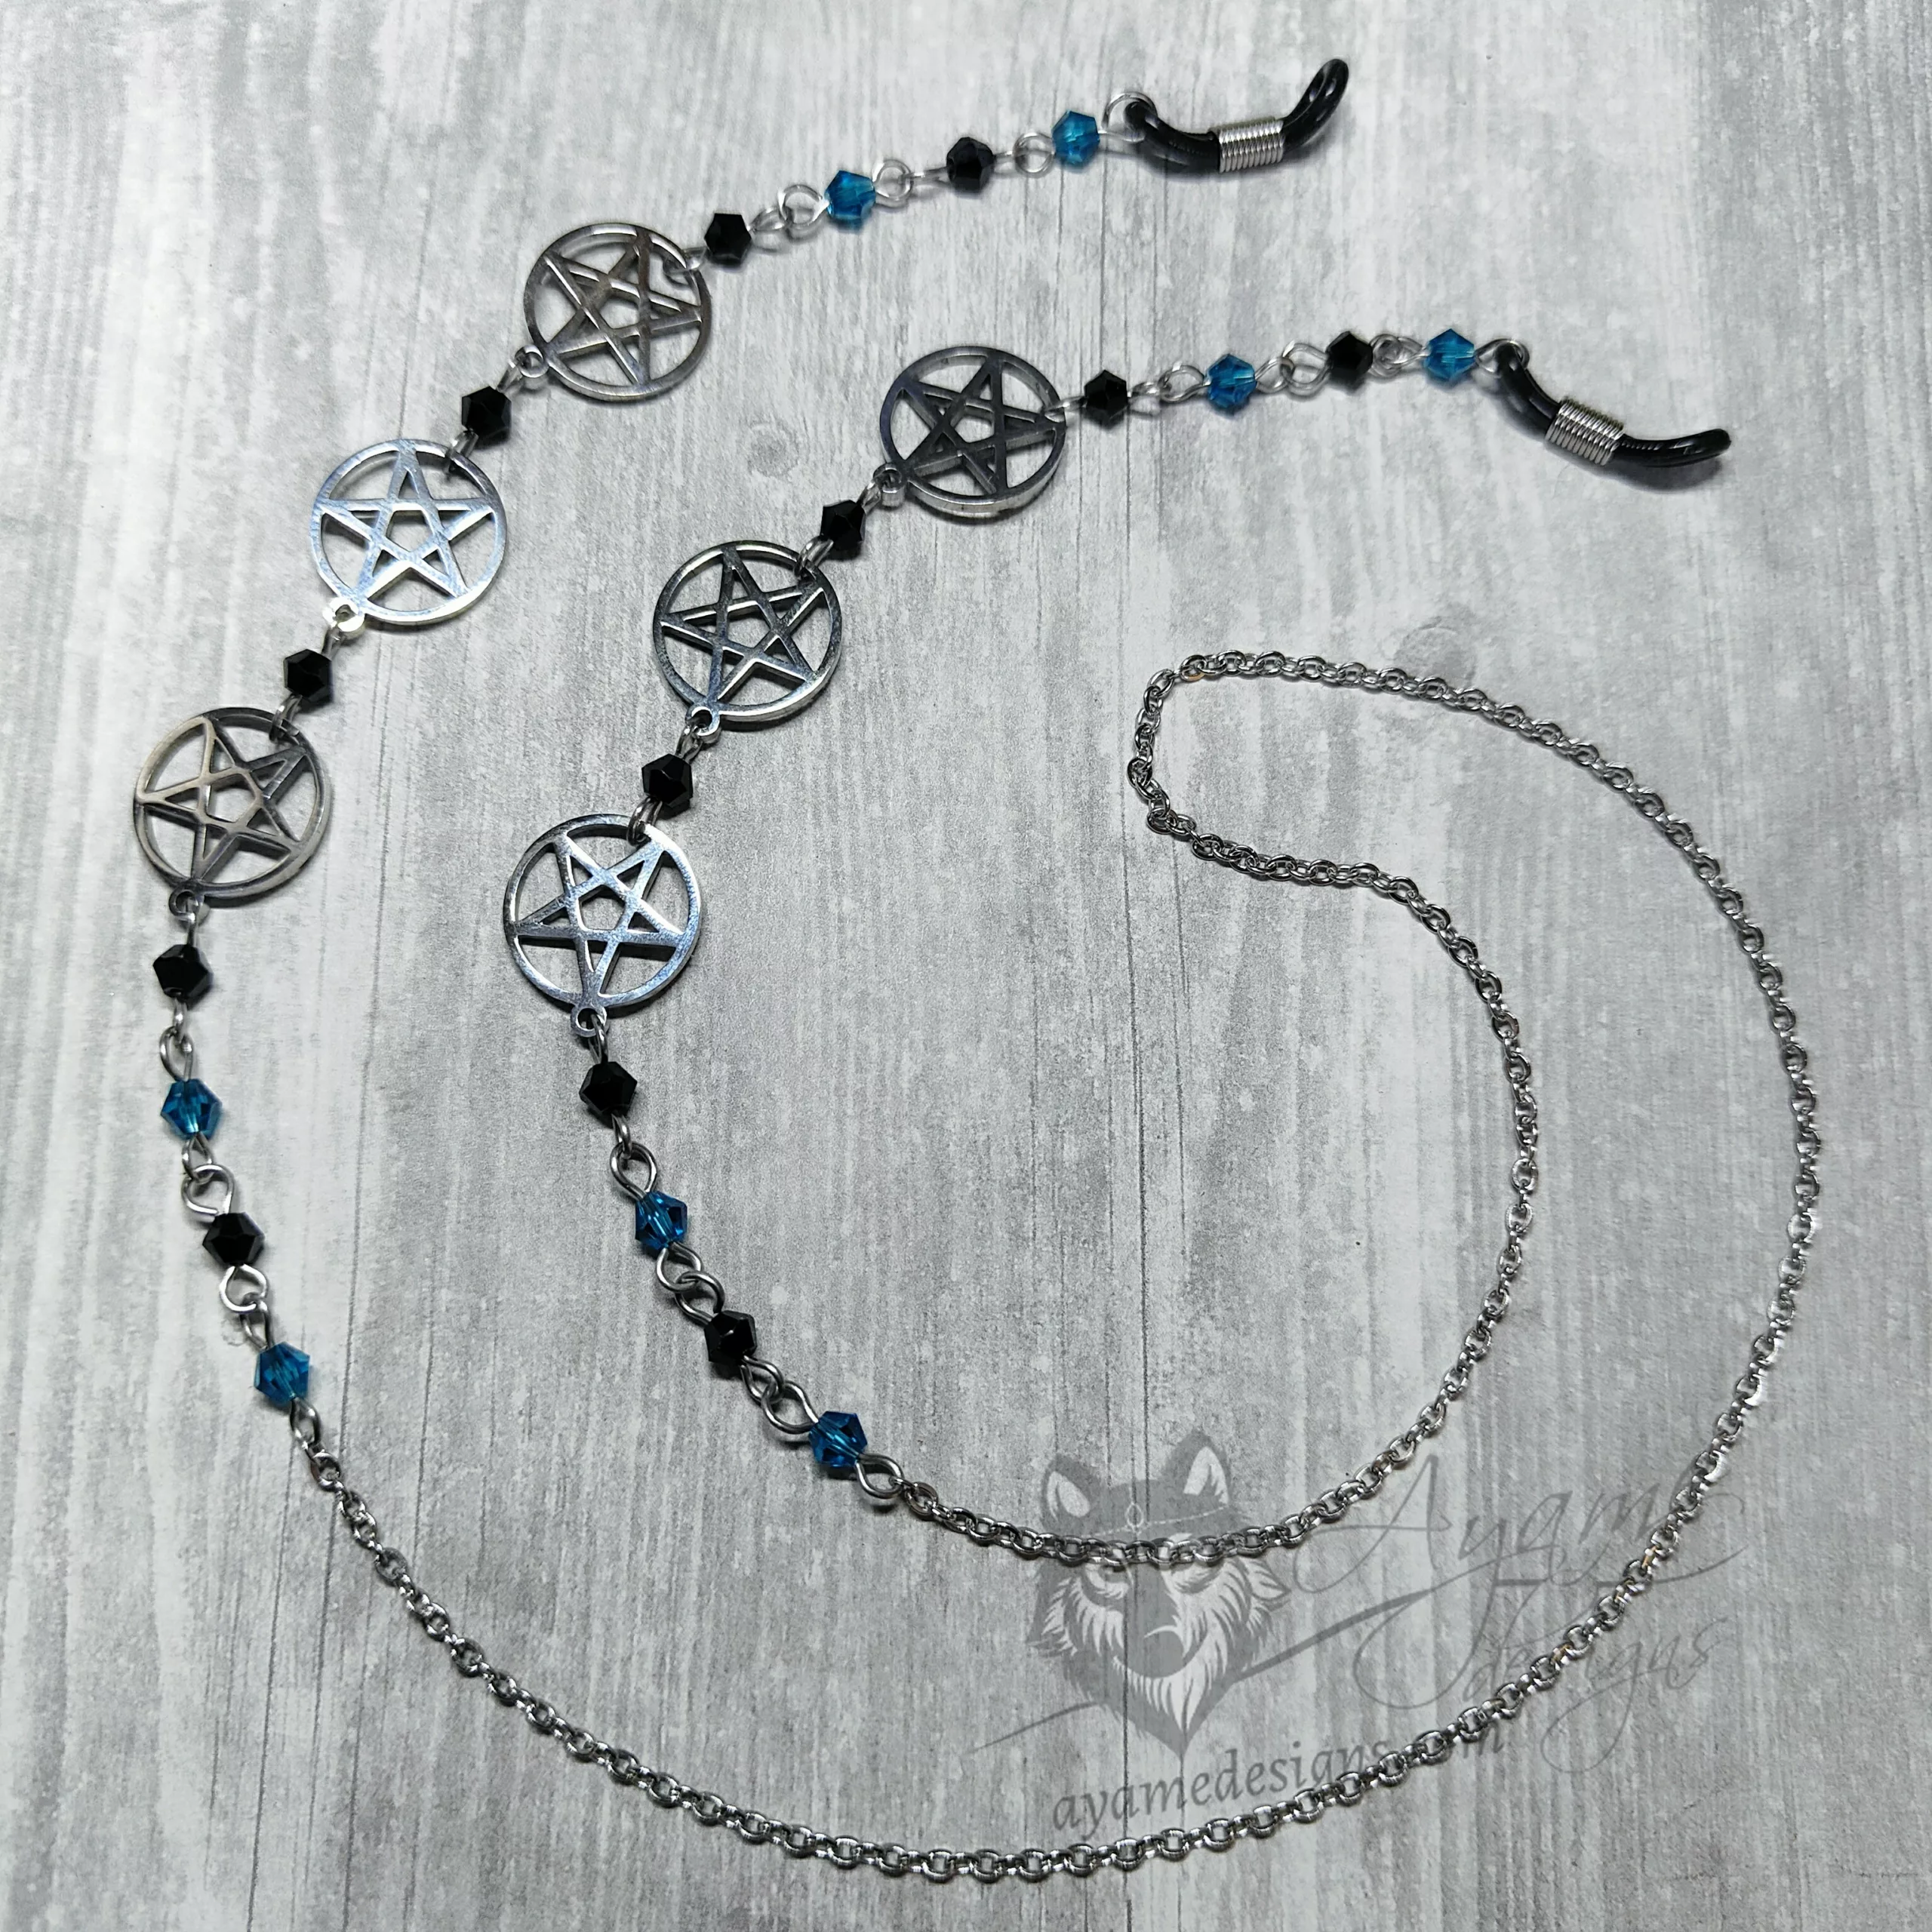 A handmade glasses chain made with laser cut stainless steel pentacle pendants (three on each side), Austrian crystal beads and stainless steel chain